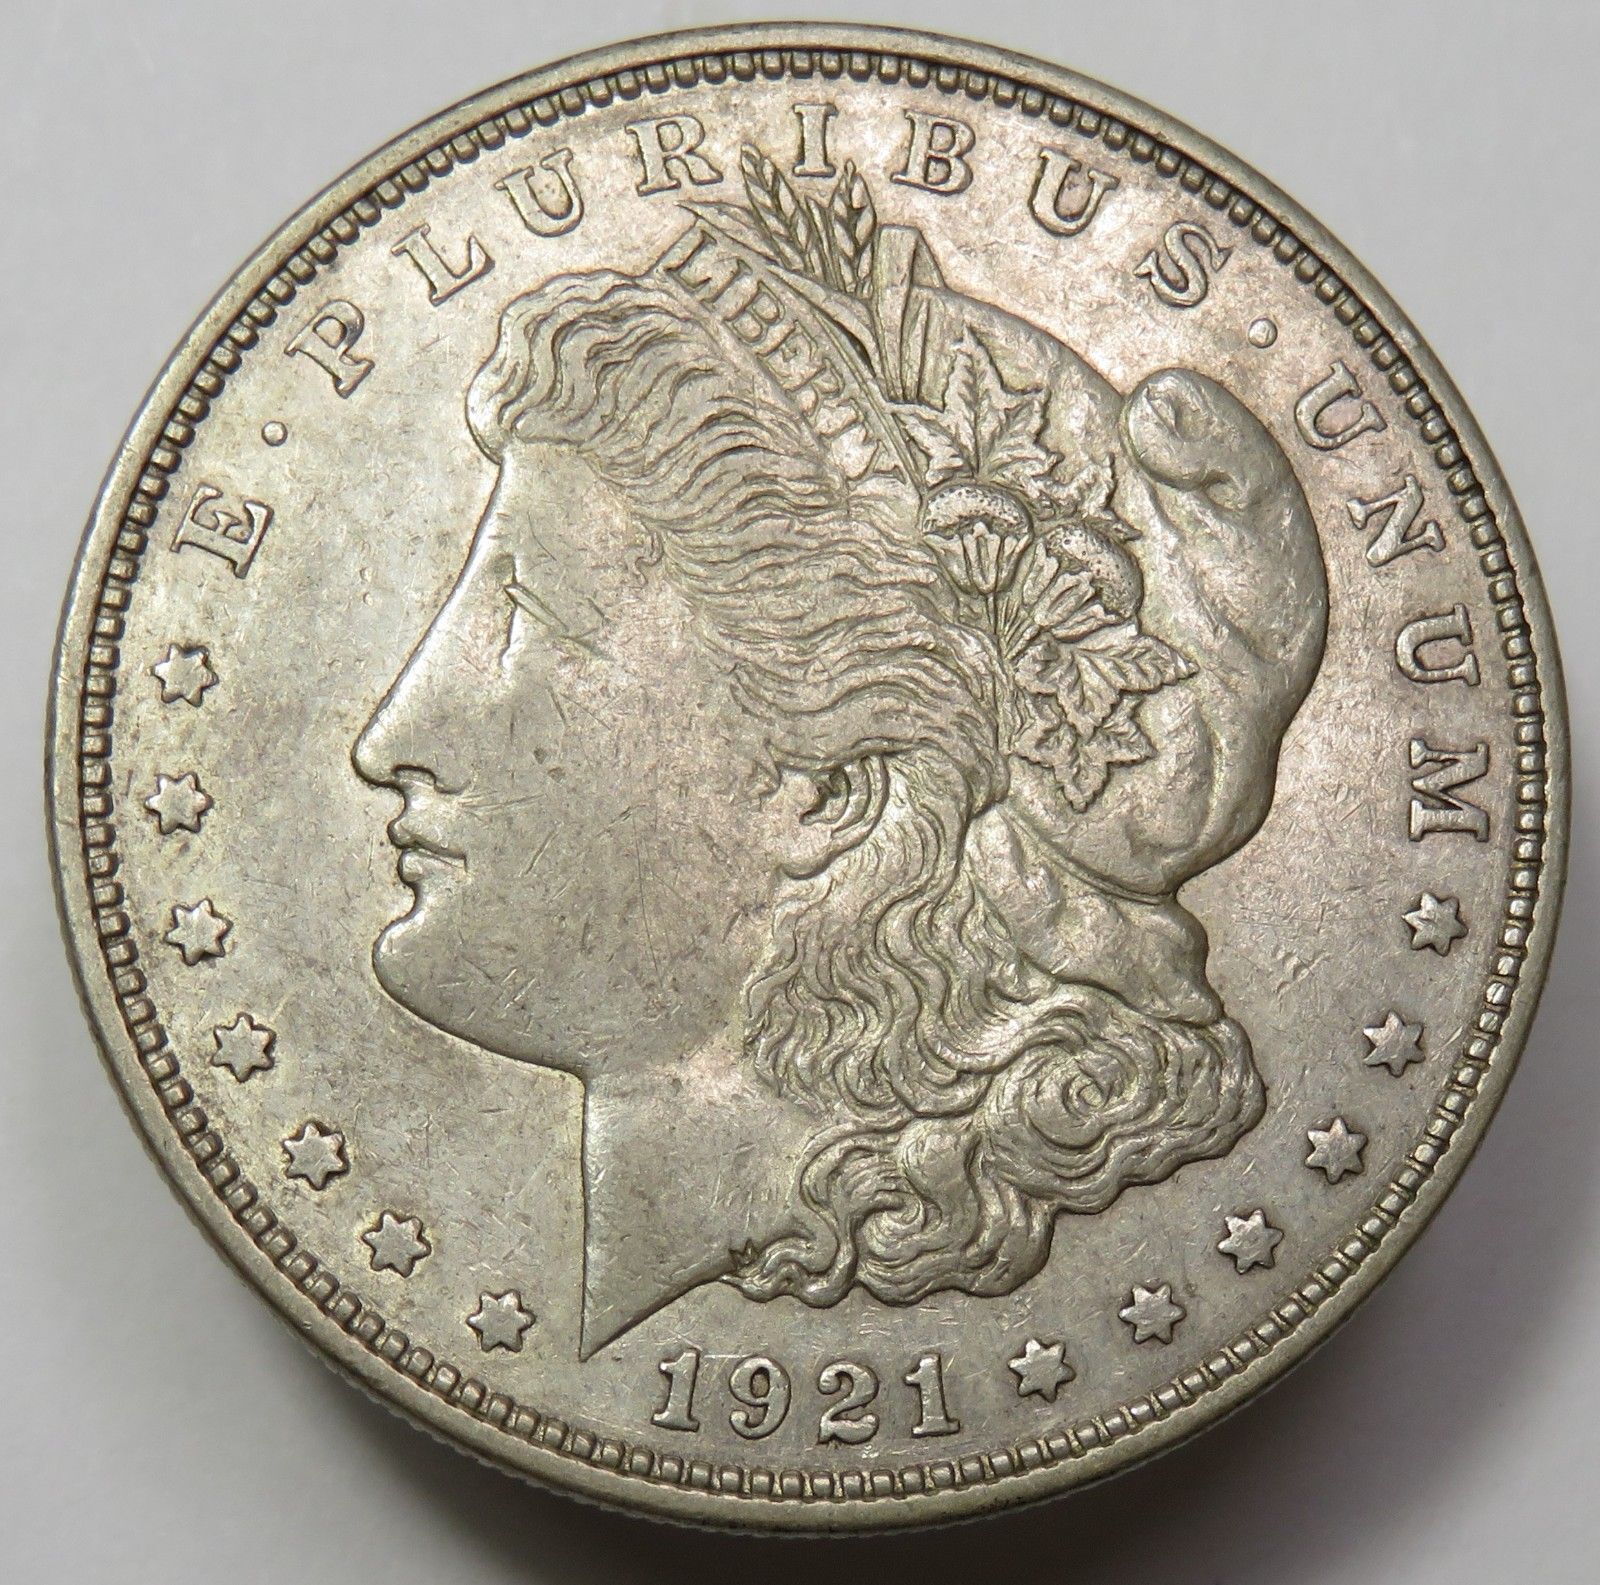 (1) 1921 MORGAN SILVER DOLLAR VG-XF CONDITION! MINT VARIES! SILVER INVESTMENT! Без бренда